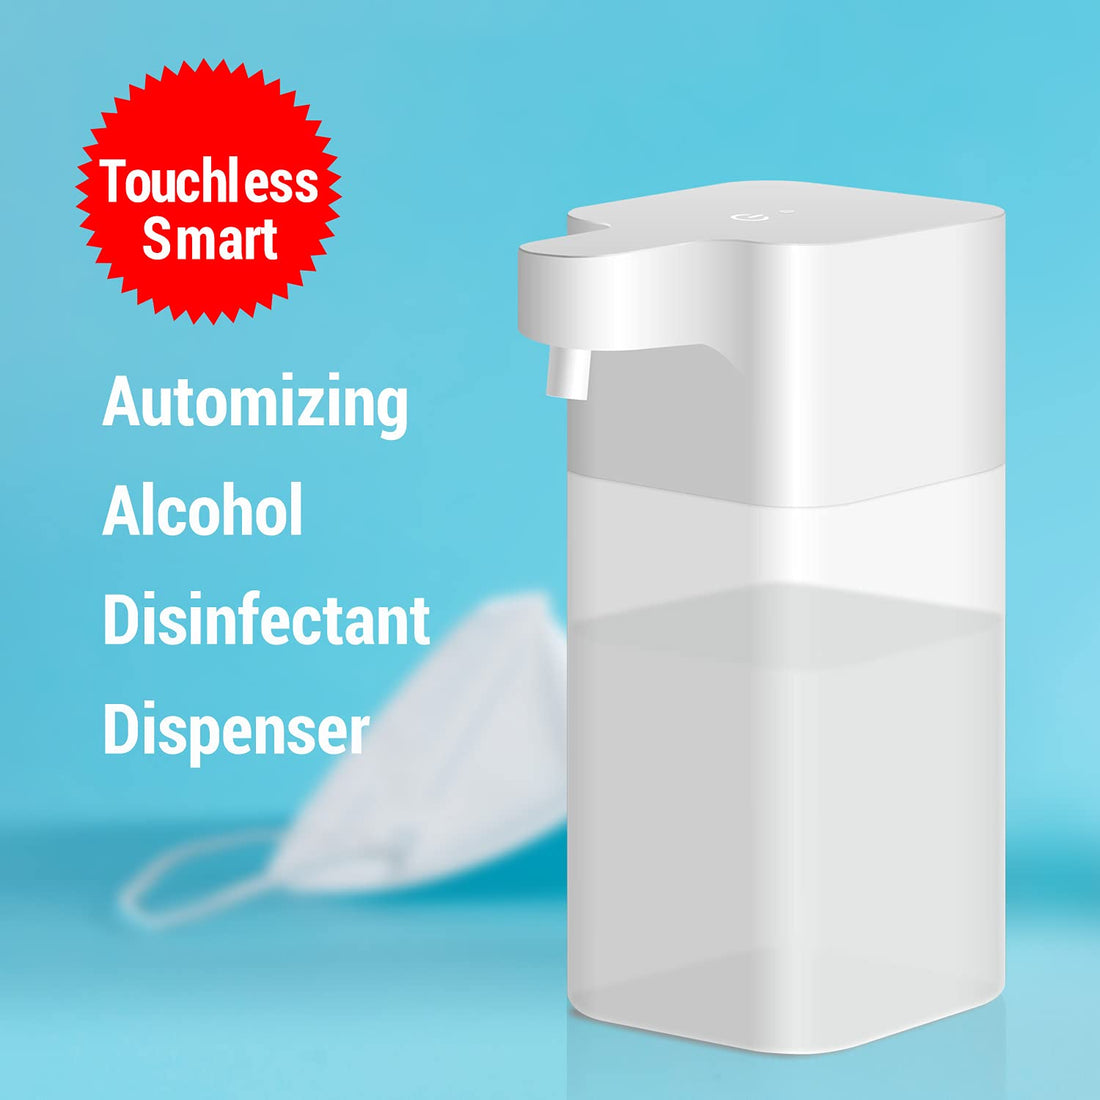 PolyGens 550ml Battery Powered Automatic Alcohol Disinfectant Dispenser,Intelligent Power Saving,Sleep Mode Design,Touchless Atomizing Alcohol Liquid Dispenser,Hands Free Alcohol Misty Dispenser